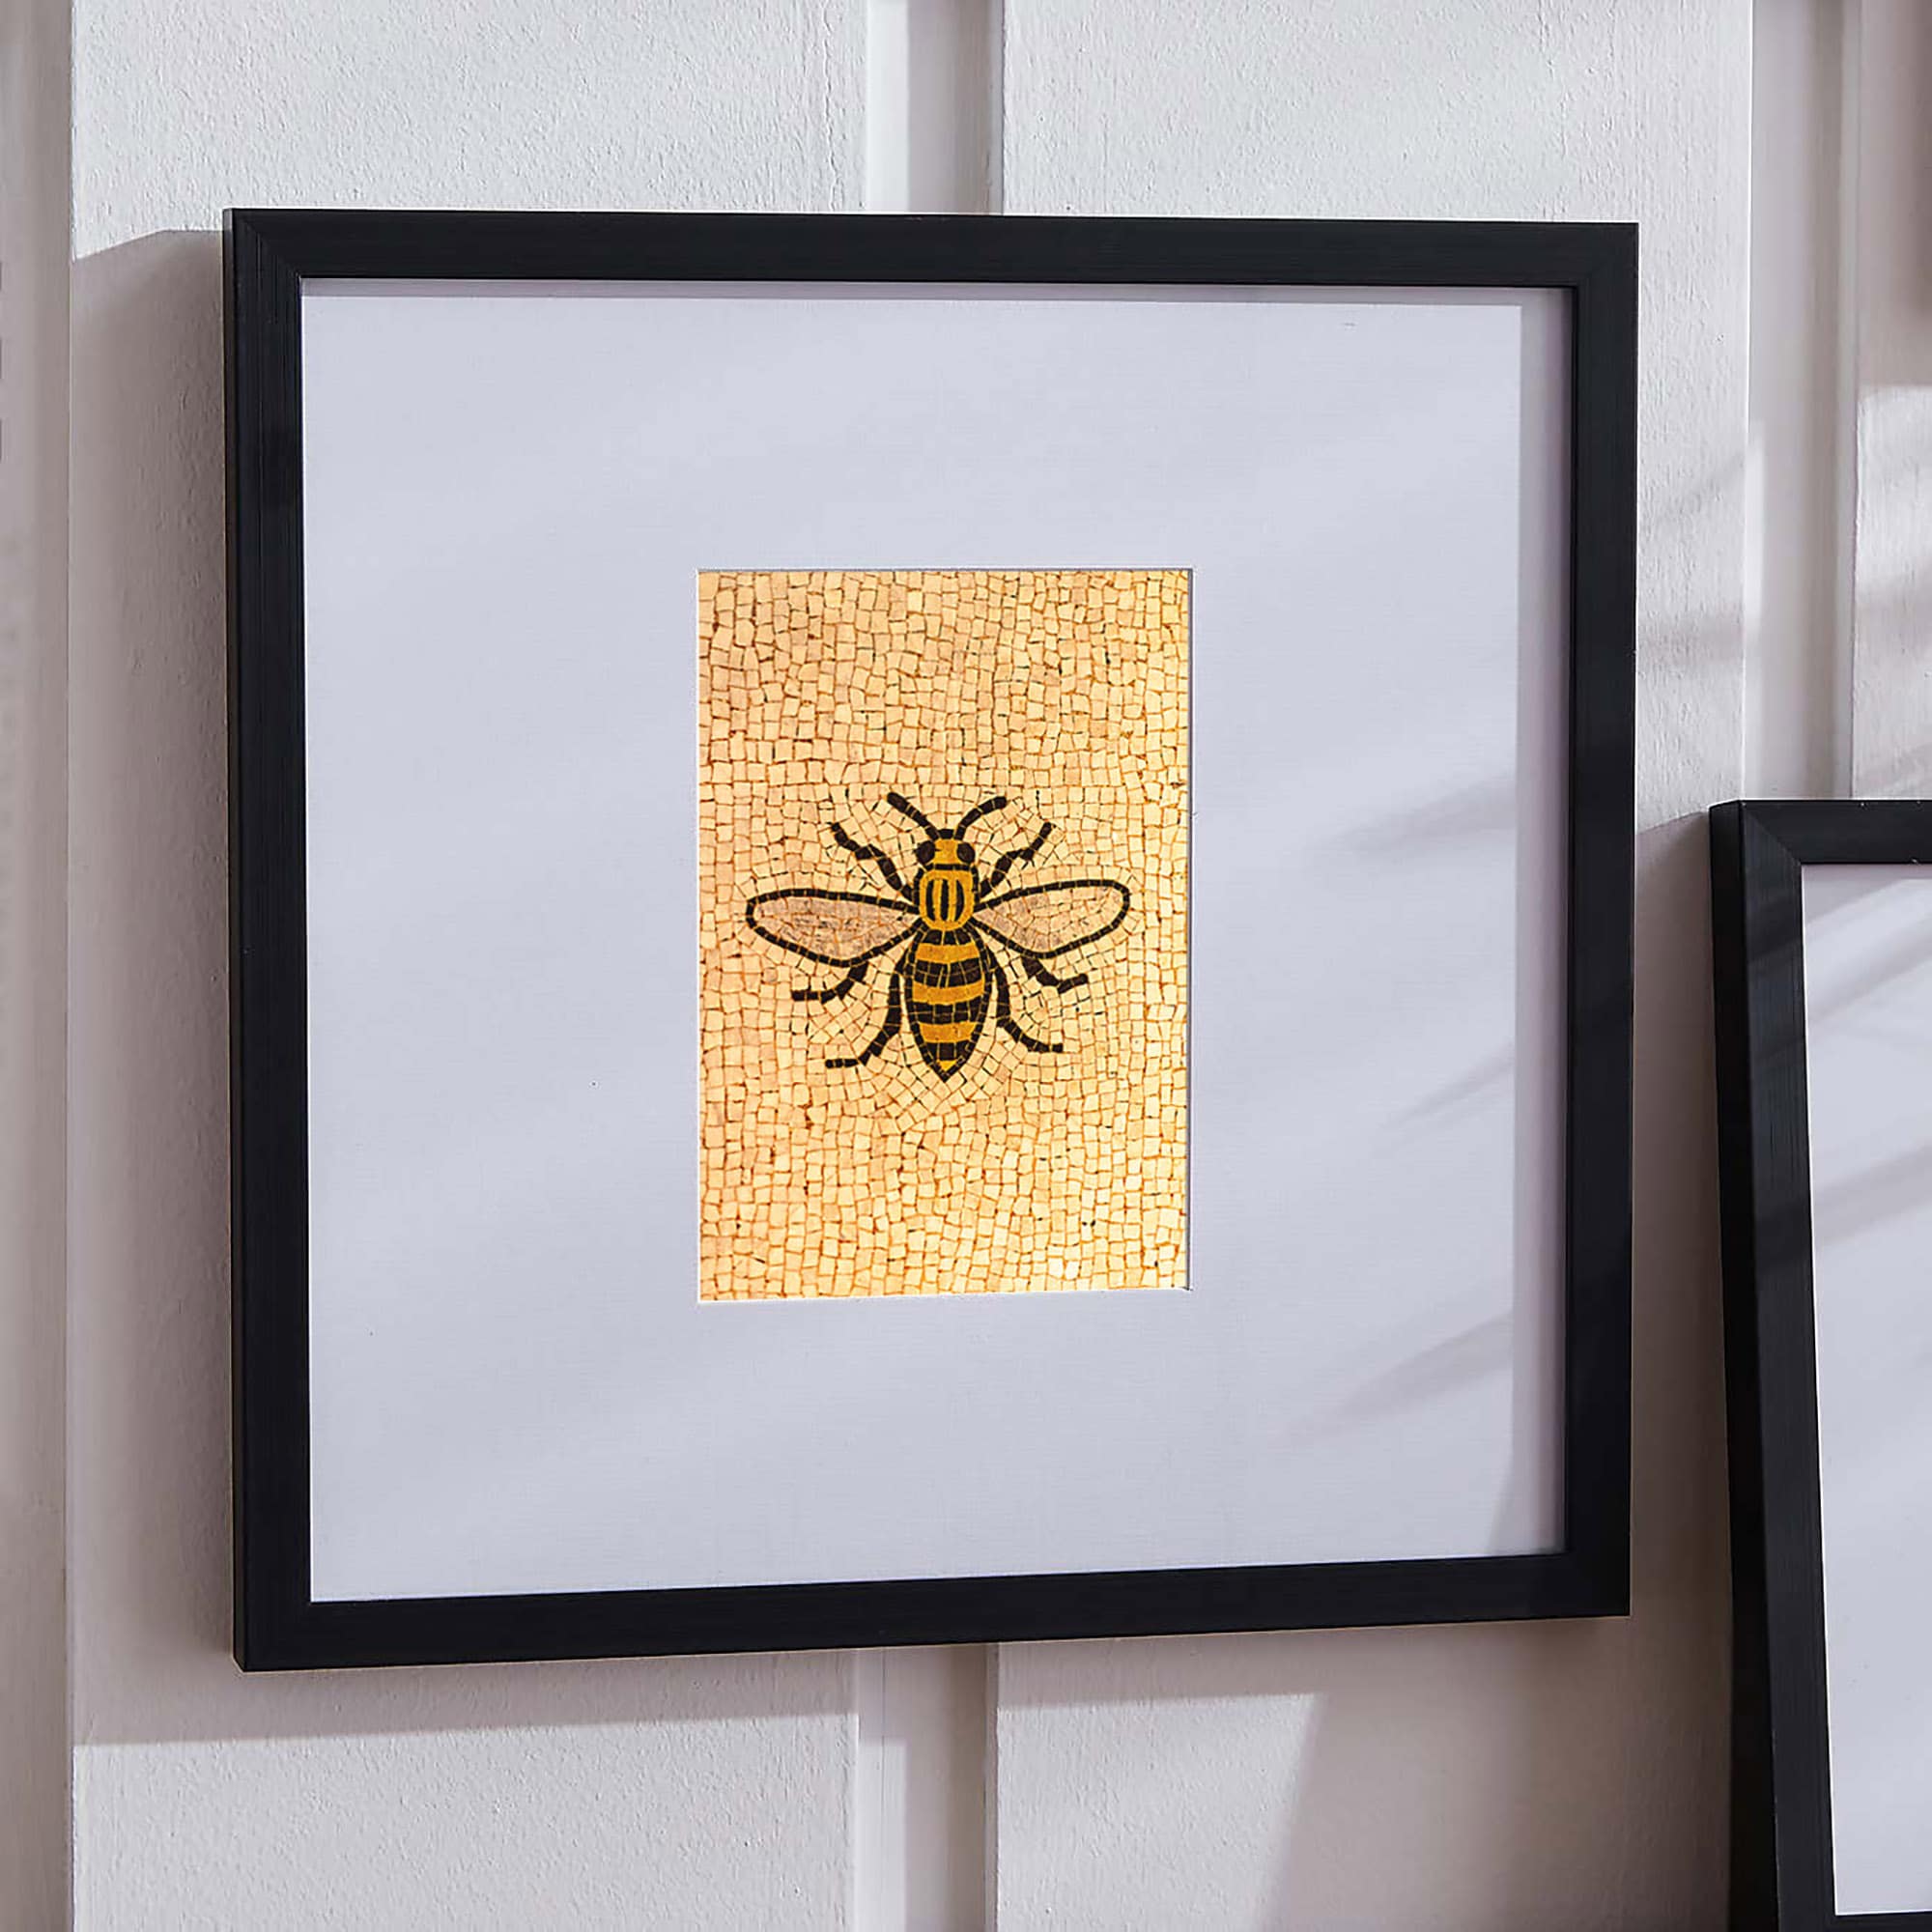 Manchester Bee Framed Oversized Mount Poster Art and Gift Ideas Bee 2